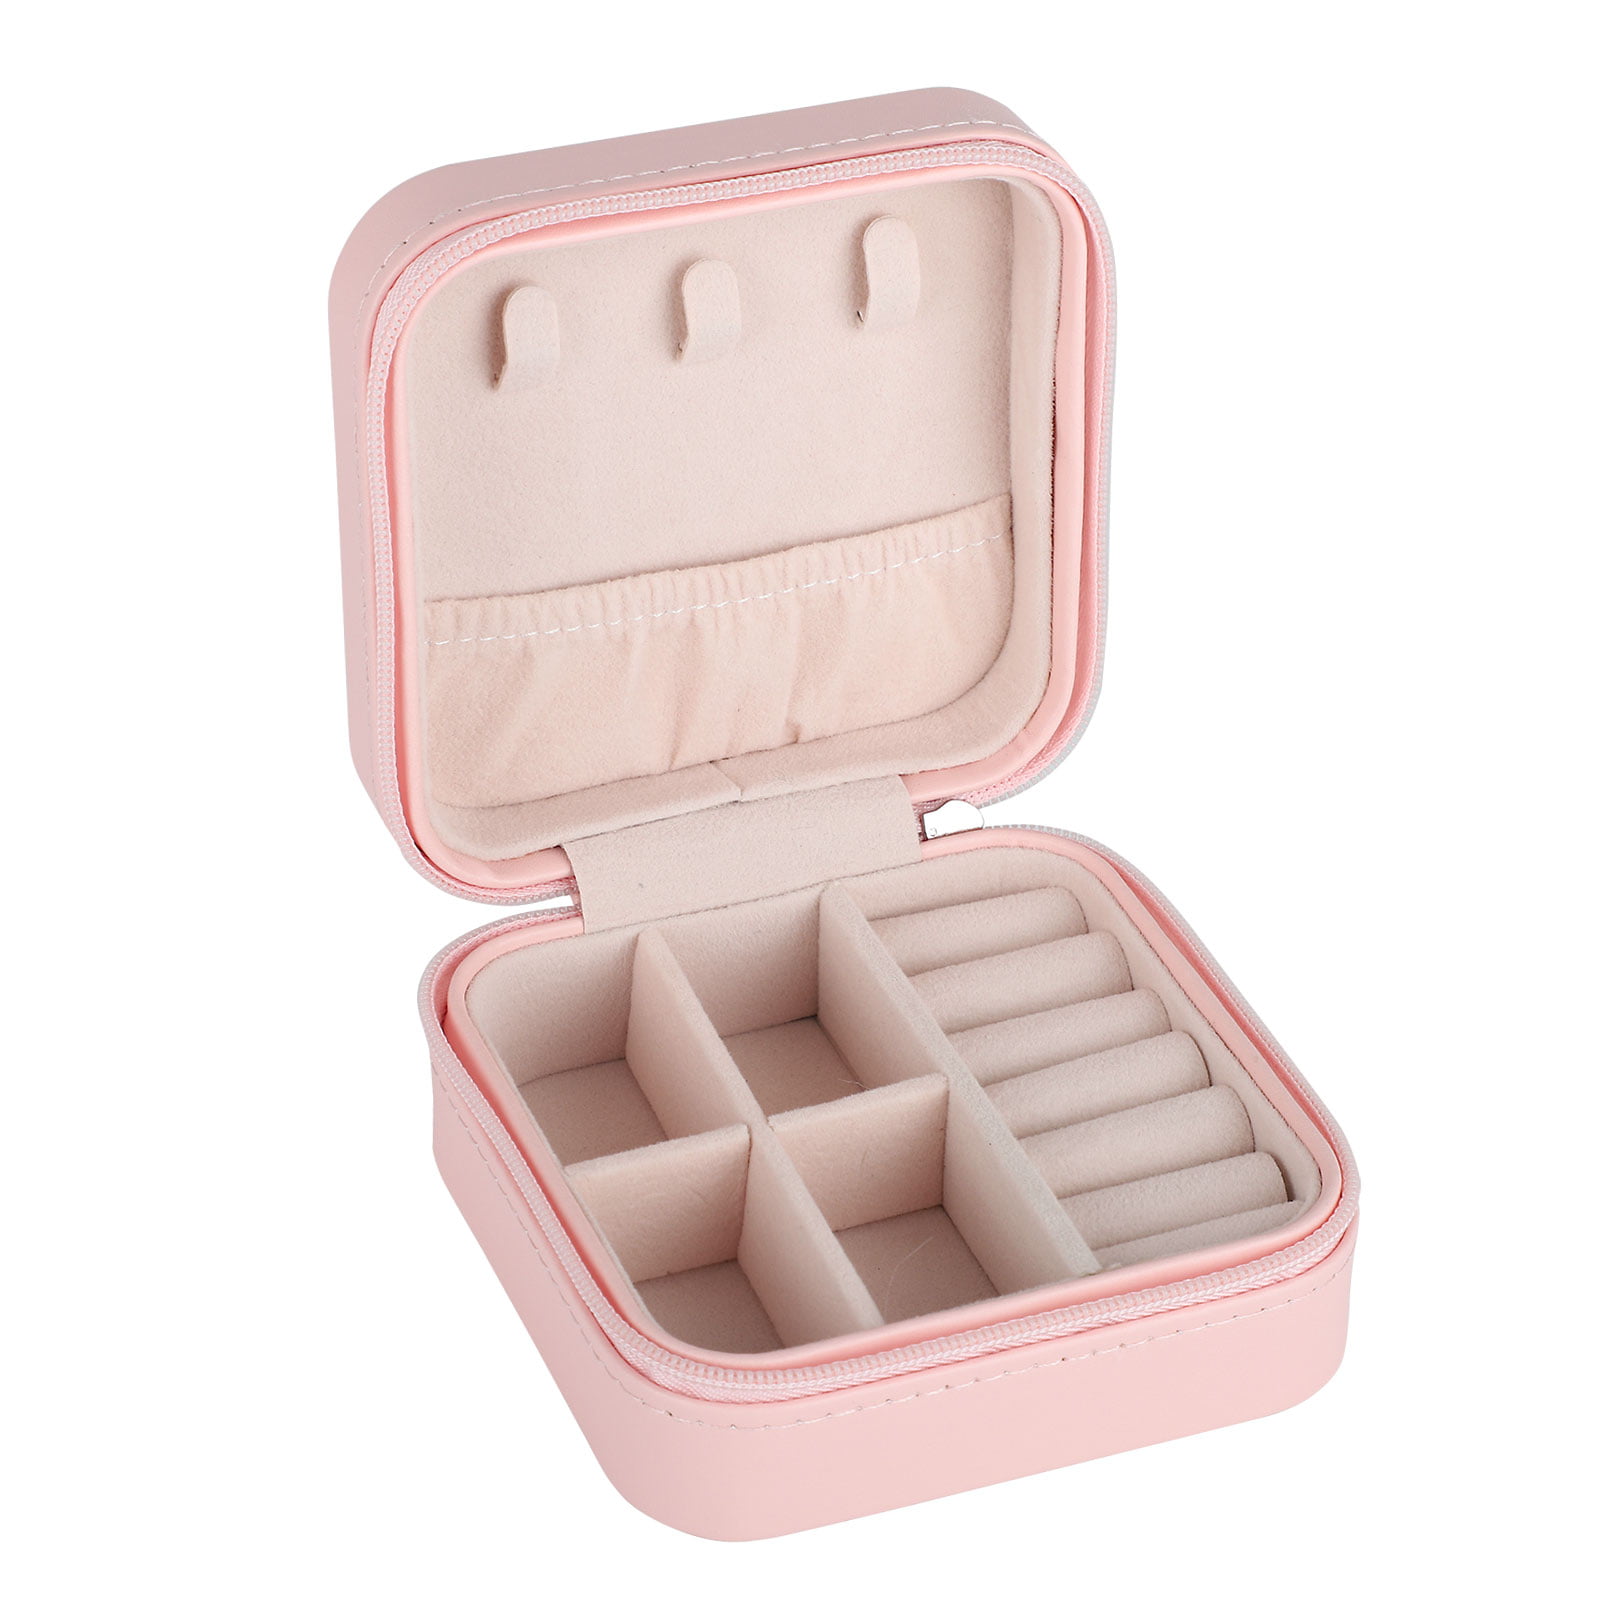 Nwvuop Mini Jewelry Box for Girls Travel Jewelry Organizer Portable Jewelry Storage Case for Necklaces Earrings Rings Bracelets Mini Travel Jewelry Case Pink 